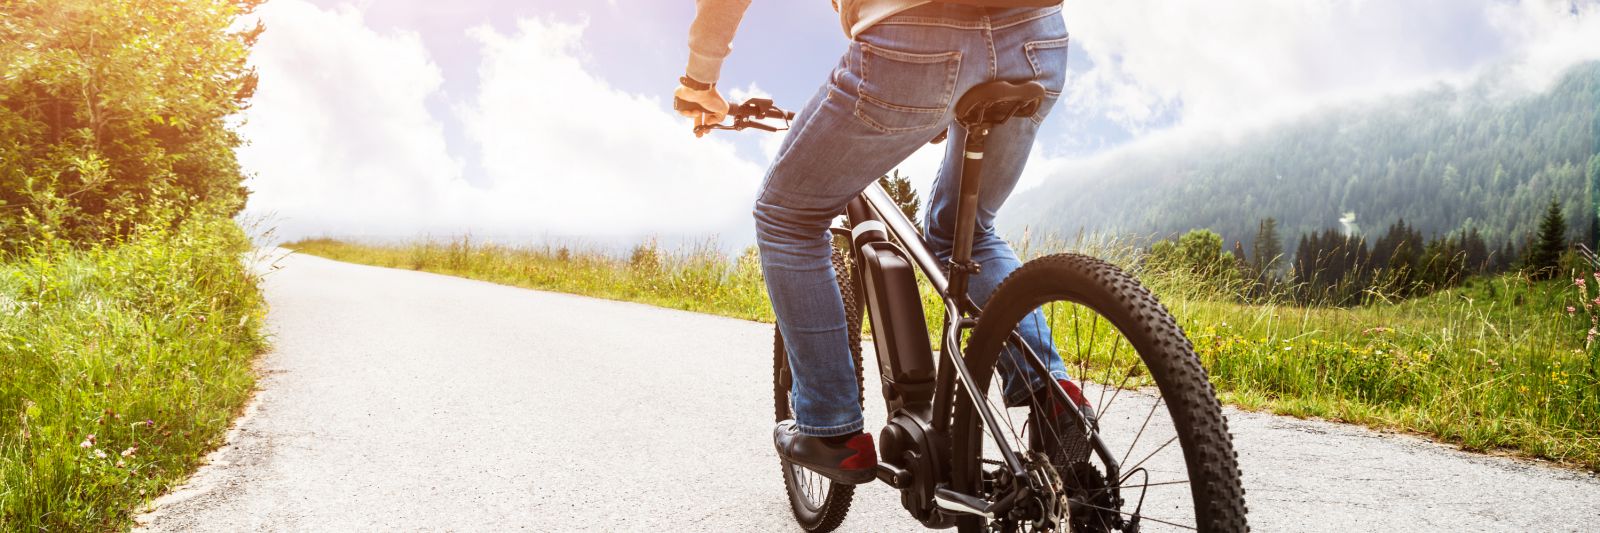 man riding an ebike on a mountain road banner image